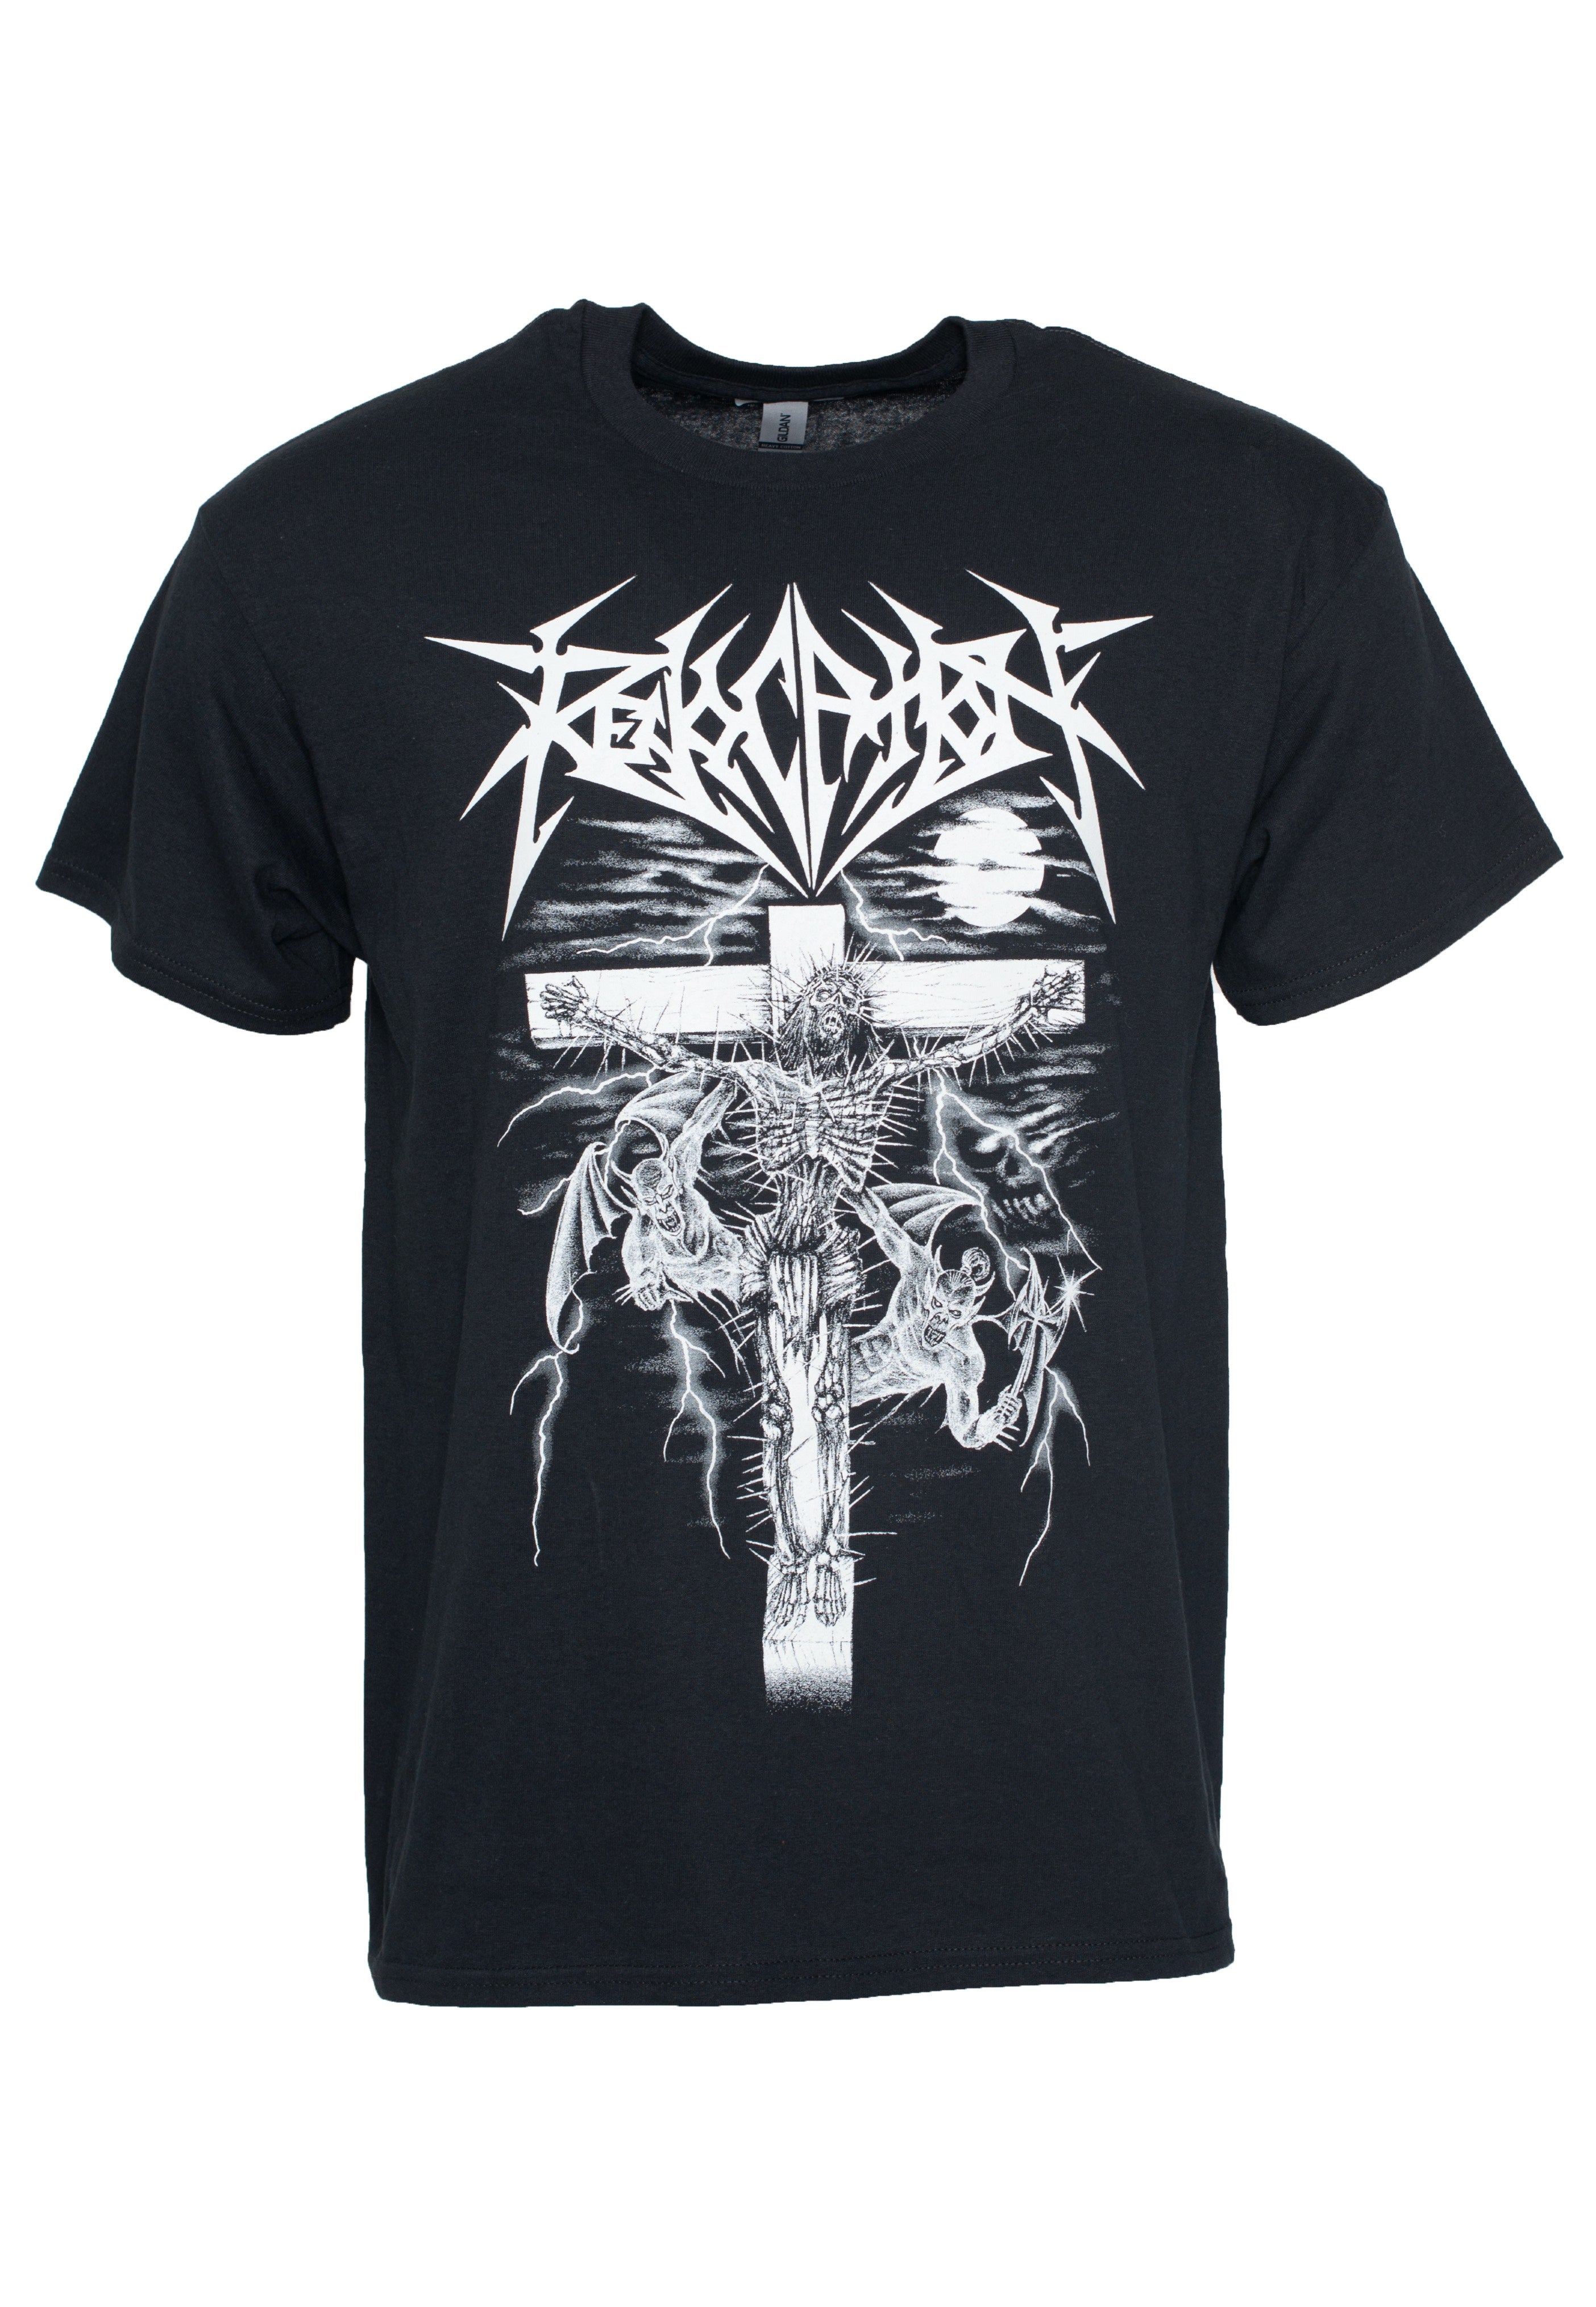 Revocation - Re-Crucified - T-Shirt